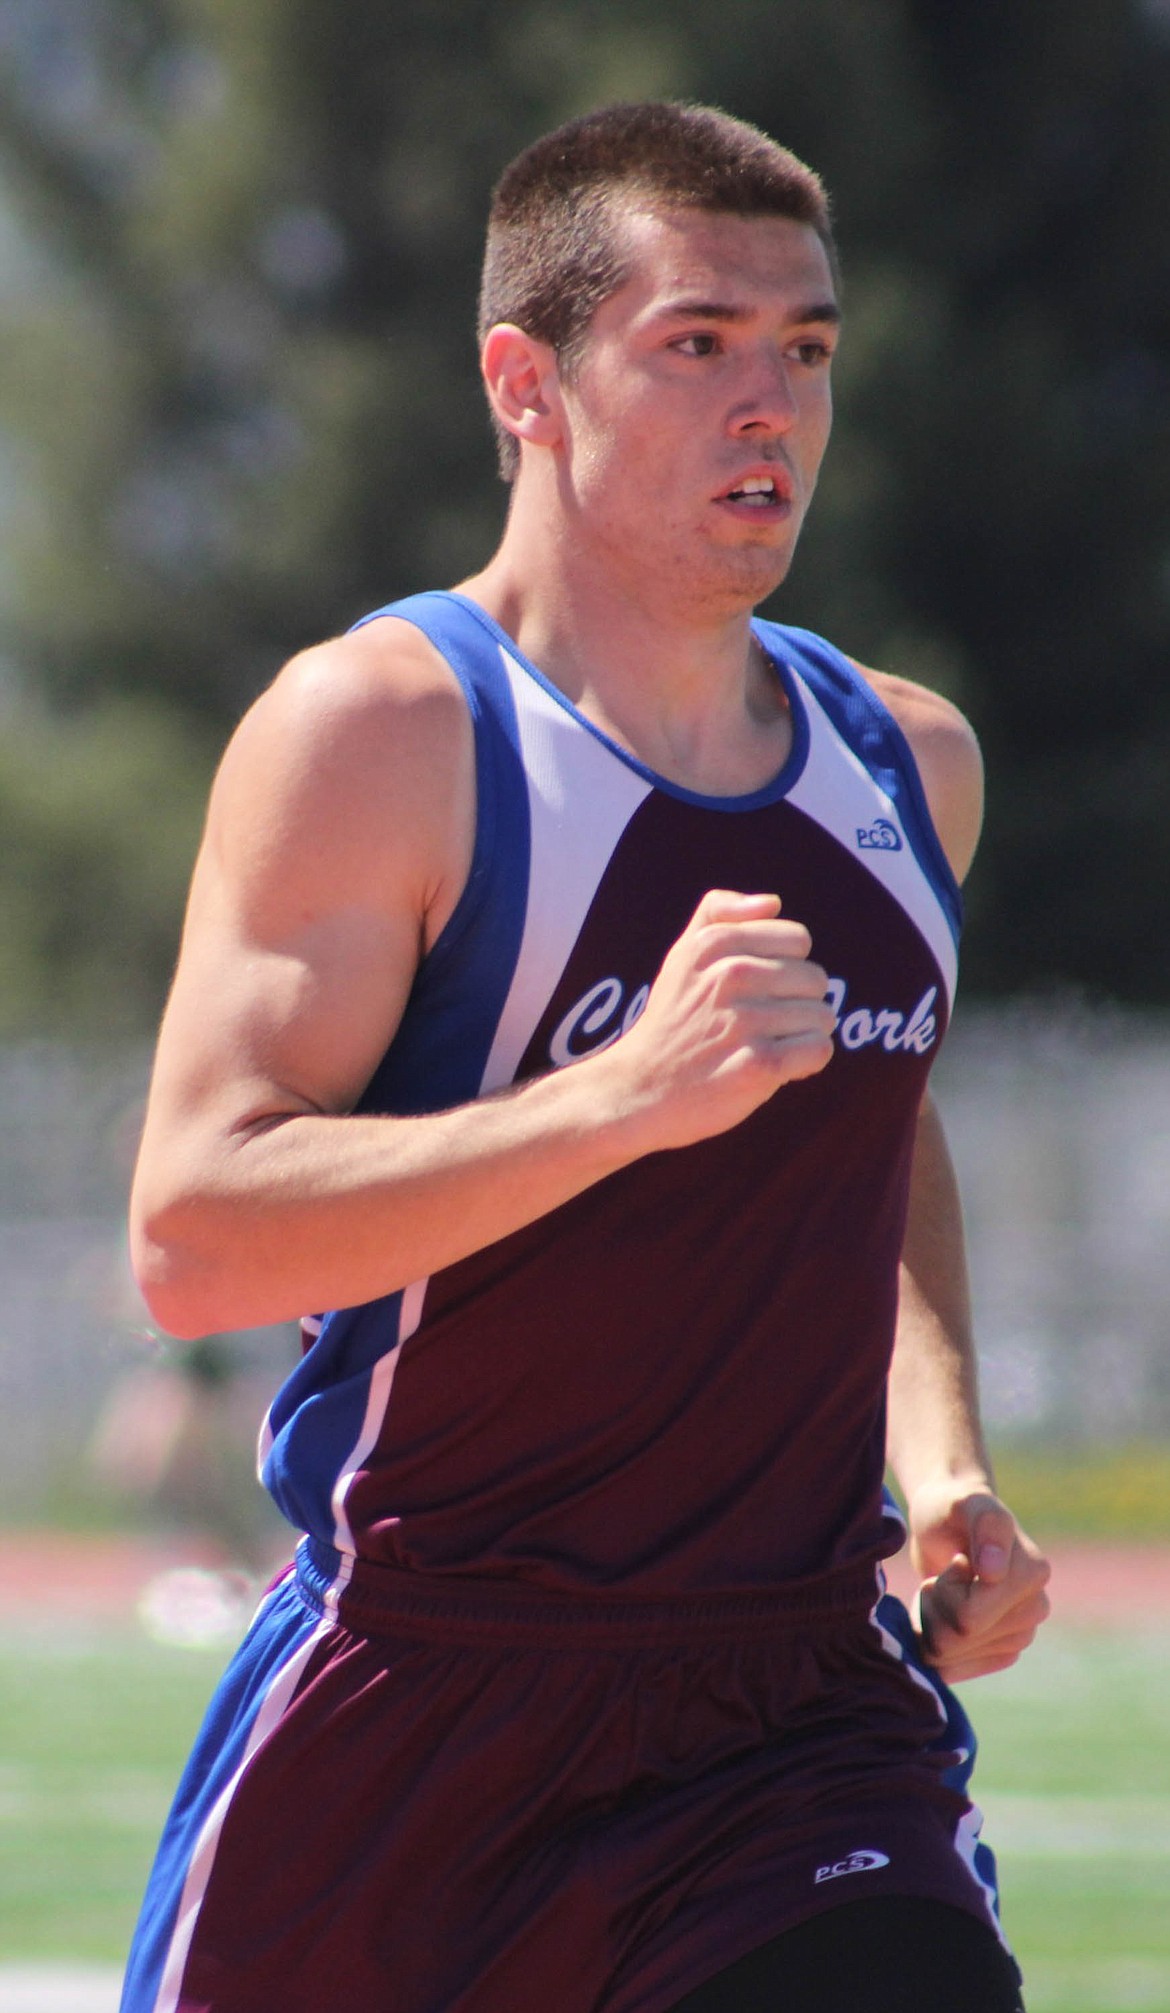 JESSE SHASKE of Clark Fork won both the 800-meter and 1,600-meter runs with 2:01.73 and 4:53.83. (Maggie Dresser/Mineral Independent)